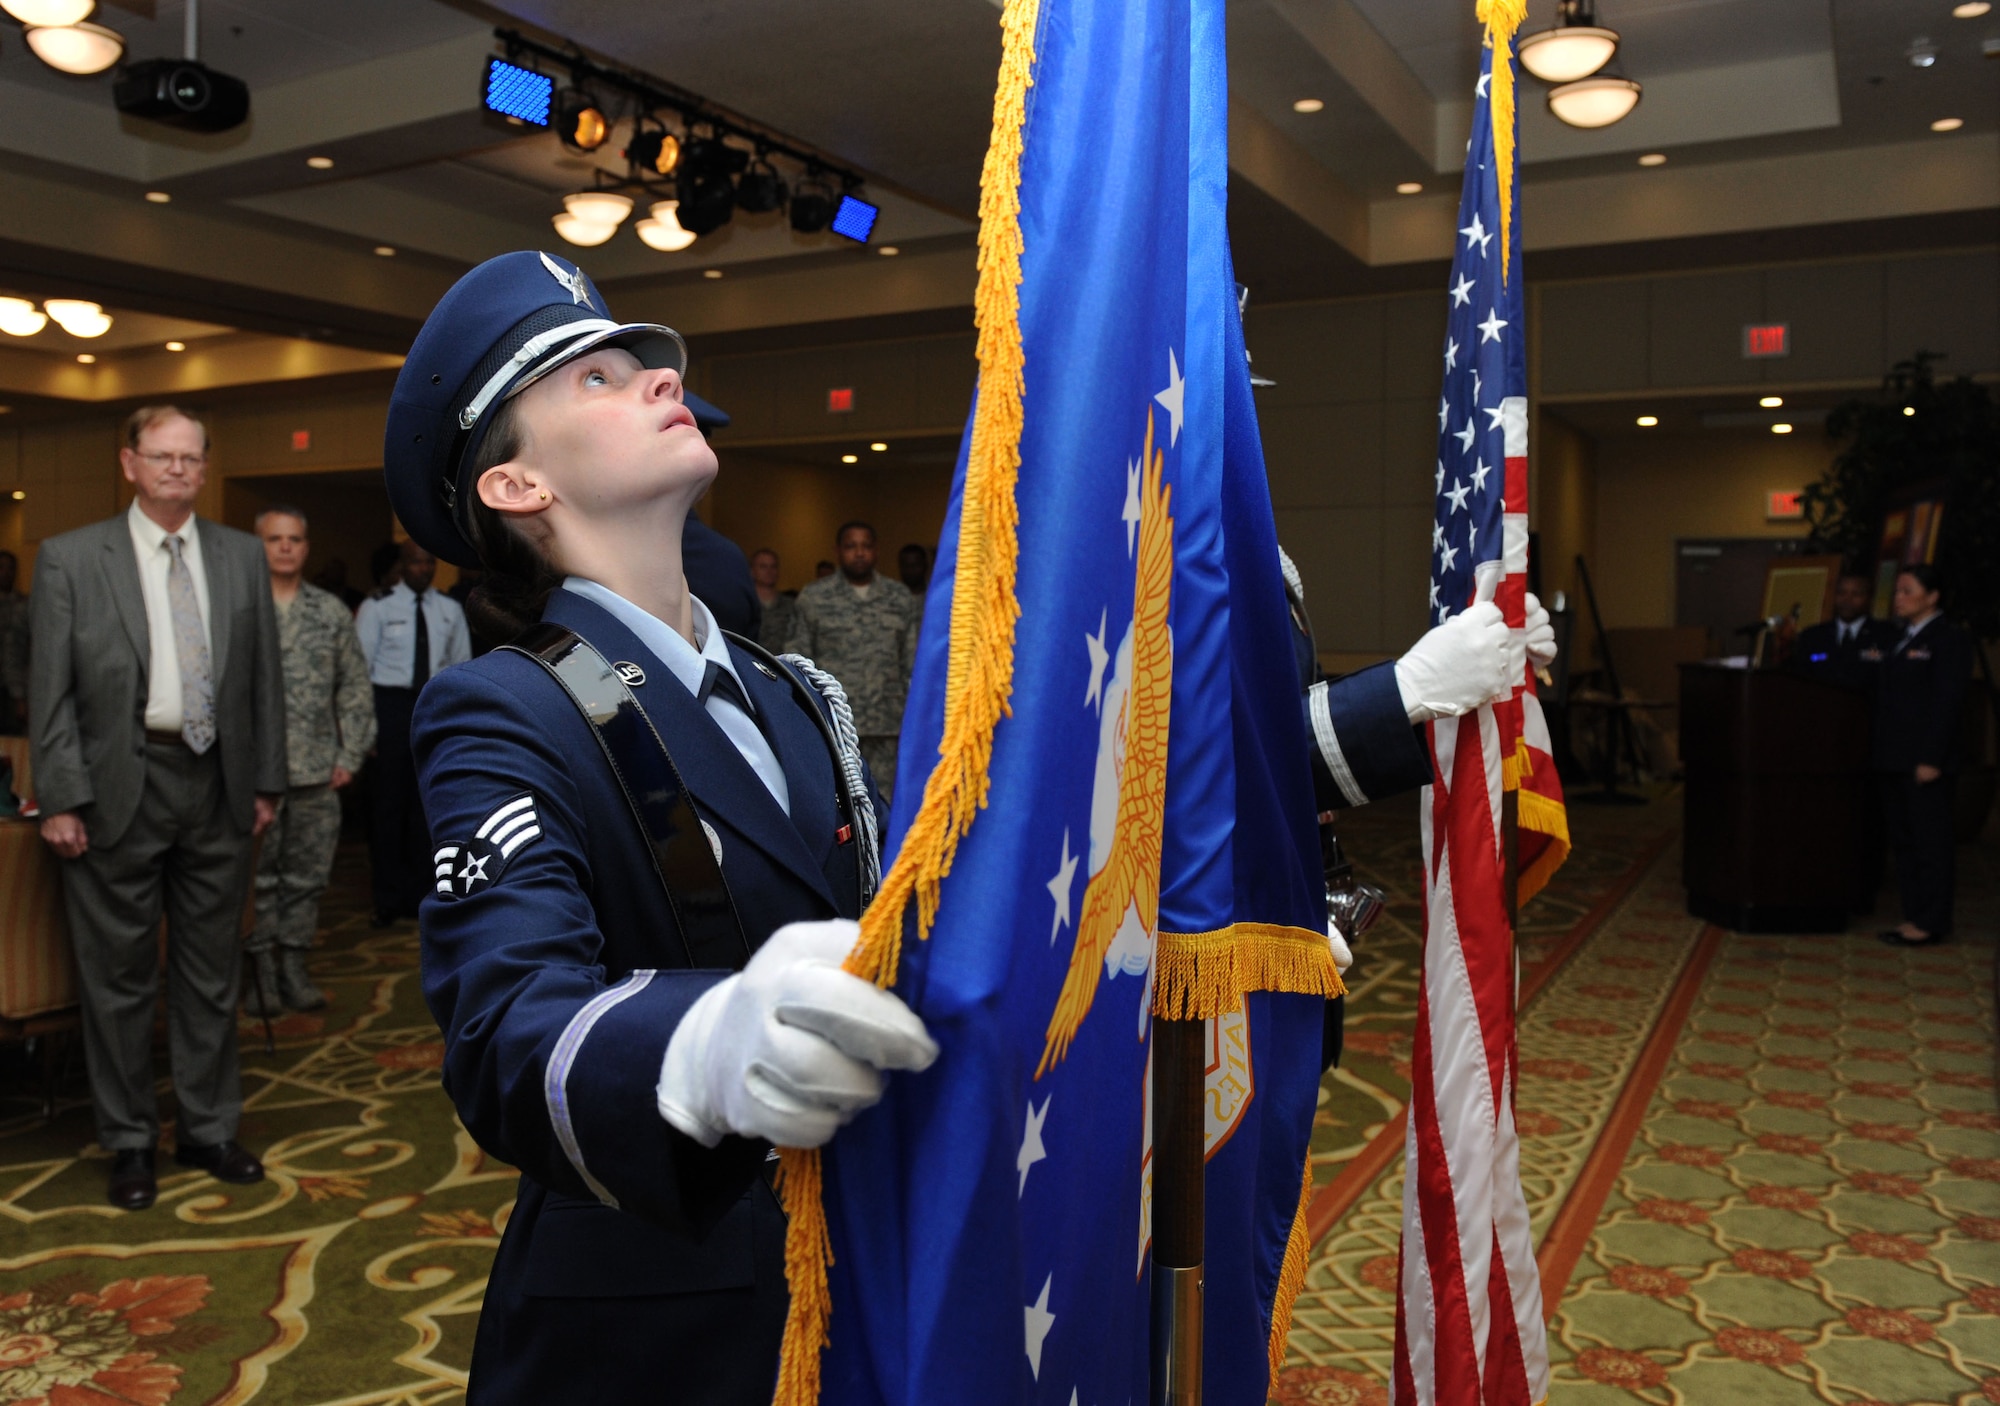 Senior Airman Elle Batdorff, Keesler Honor Guardsman, posts the colors during the African American Heritage Committee's Black History Month luncheon at the Bay Breeze Event Center Feb. 25, 2016, Keesler Air Force Base, Miss. The theme for the event was “Hallowed Grounds: Sites of African American Memories.” (U.S. Air Force photo by Kemberly Groue)